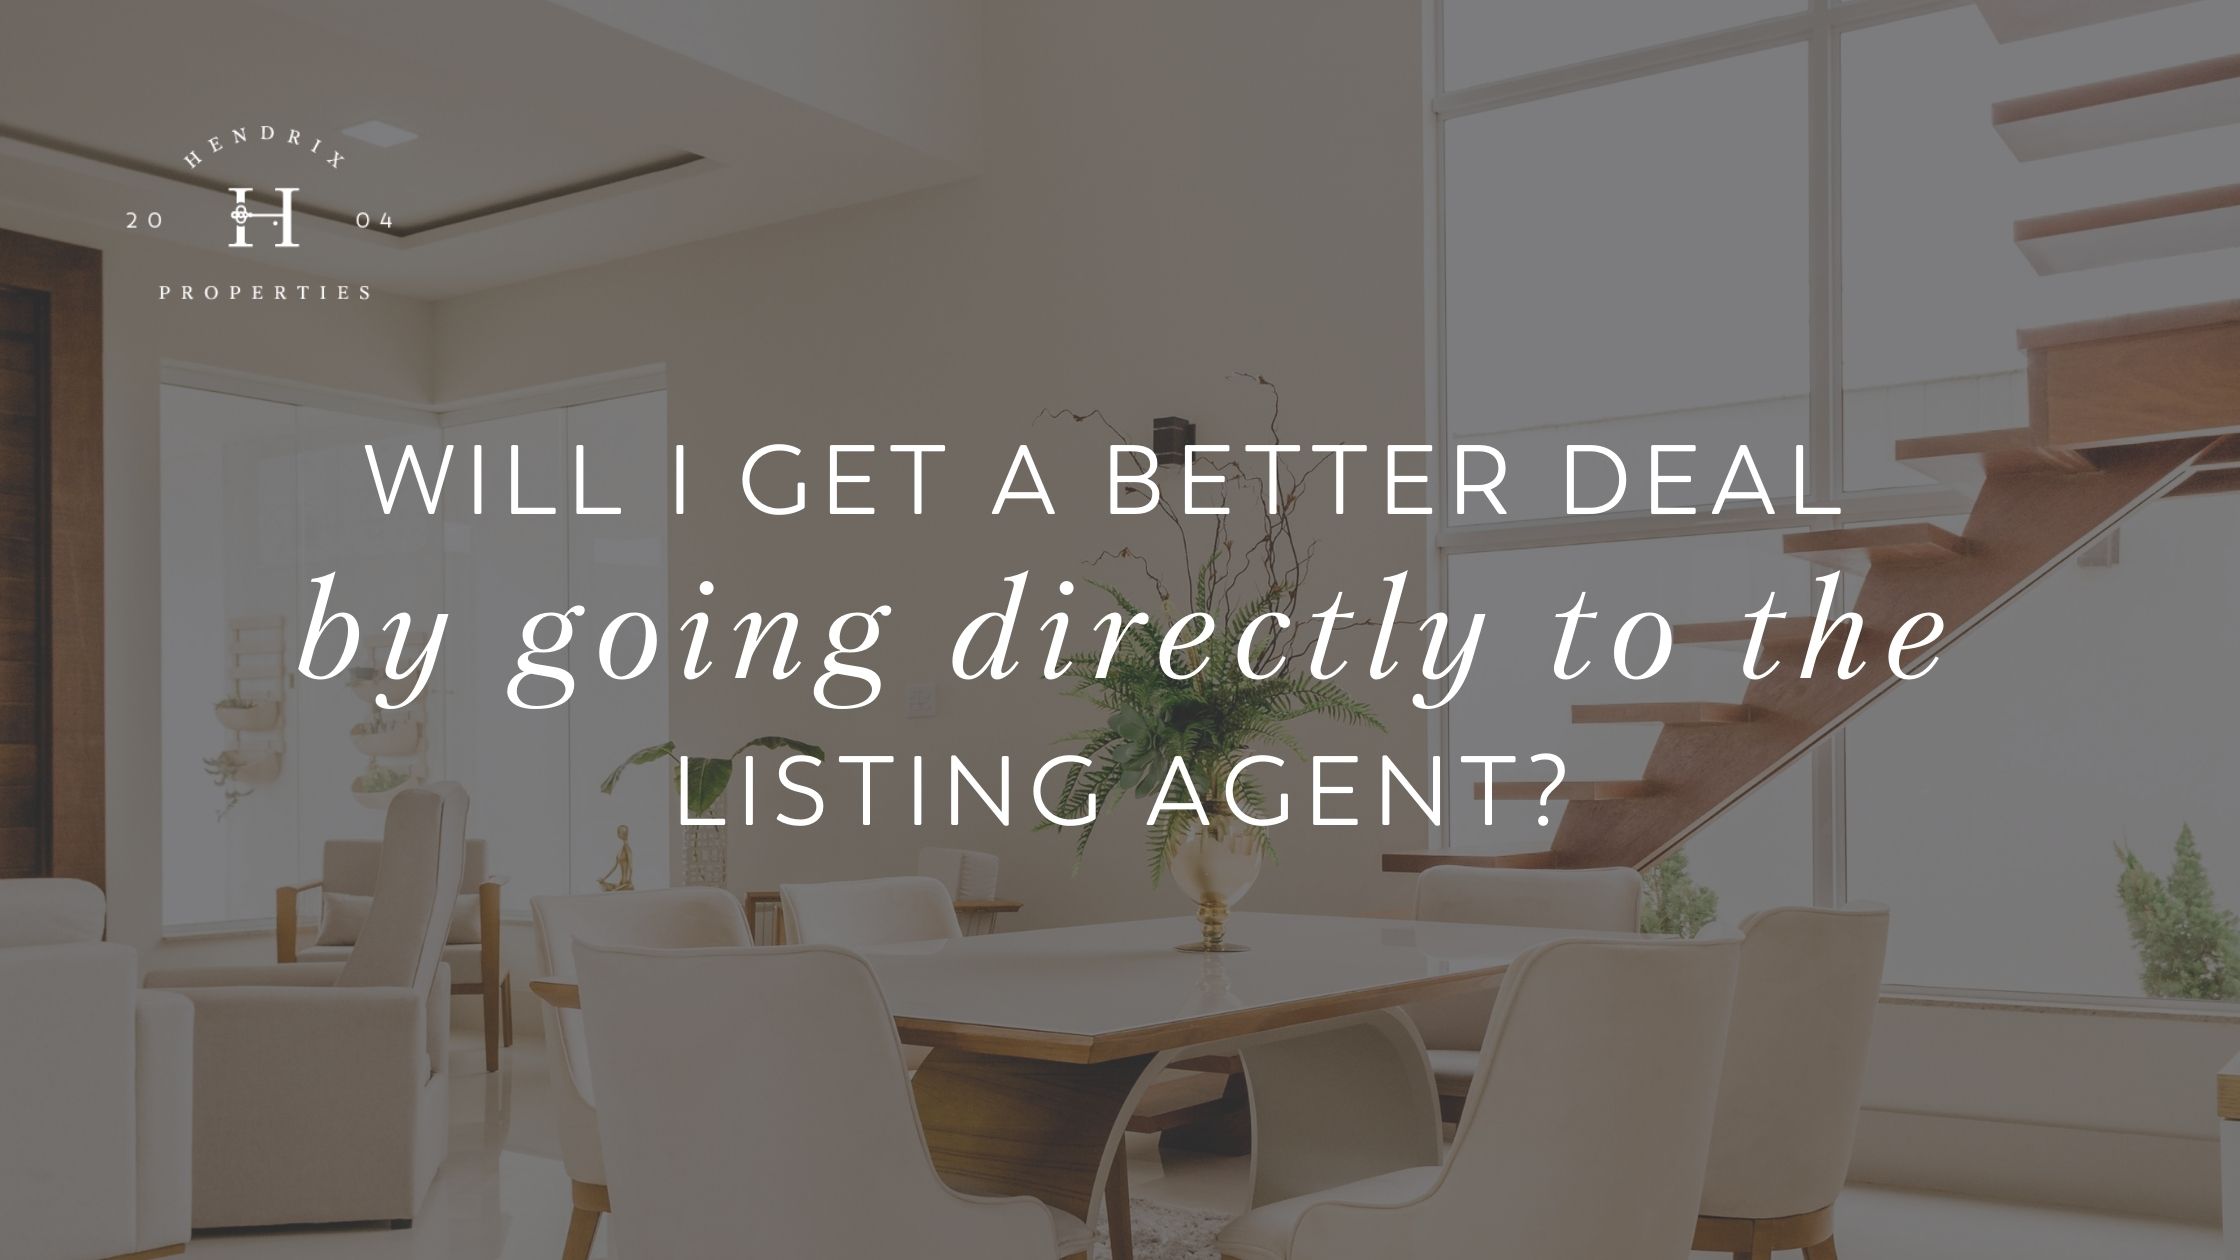 Will I get a better deal if I work with listing agent?